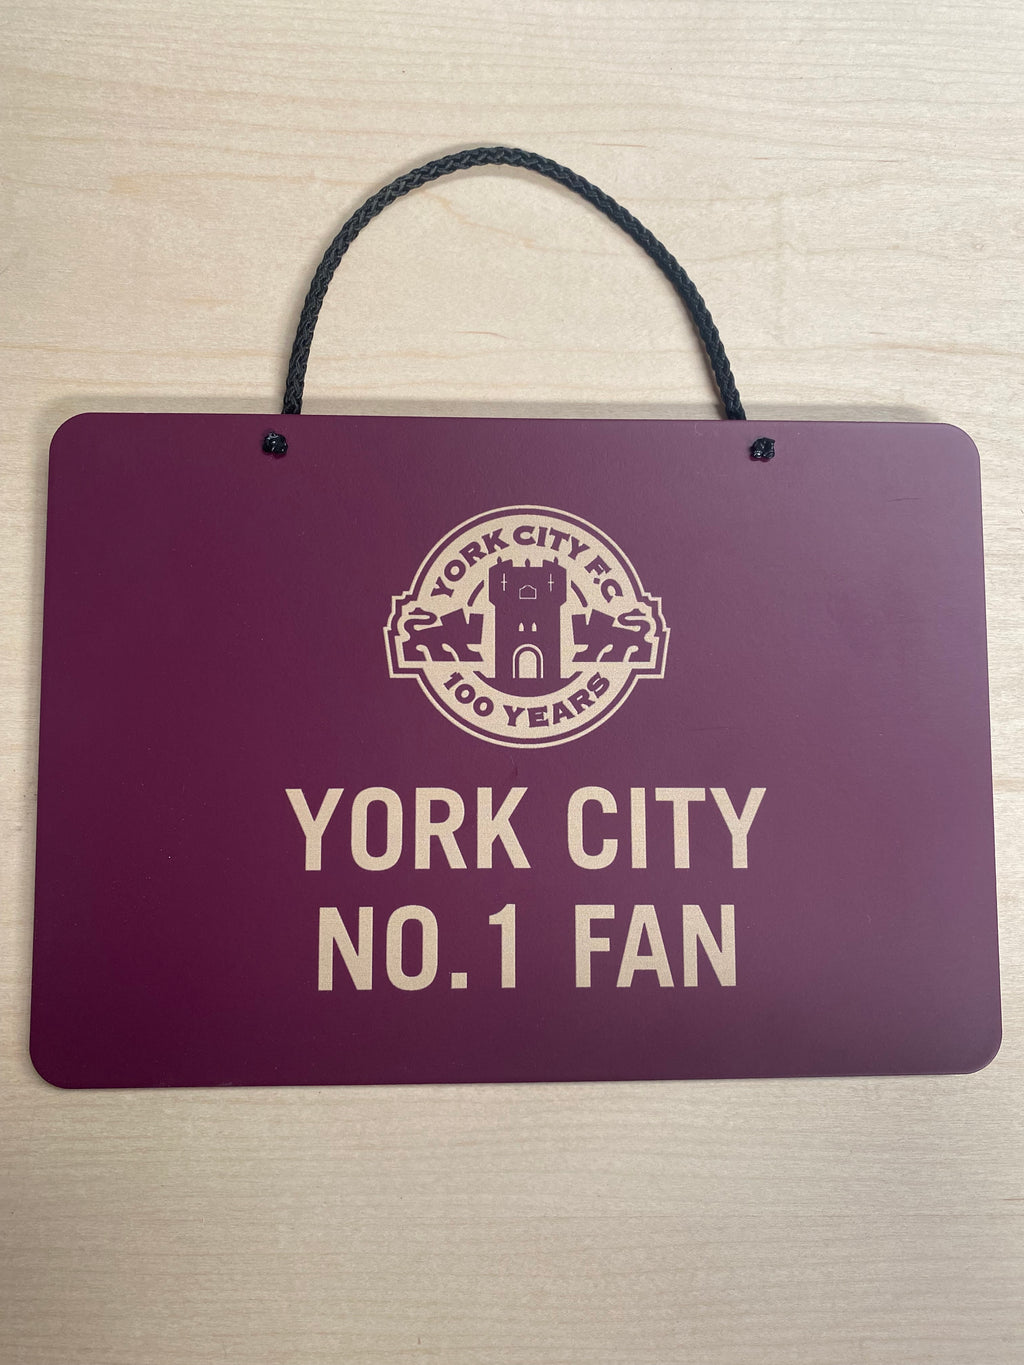 YCFC No.1 Fan Wooden Sign